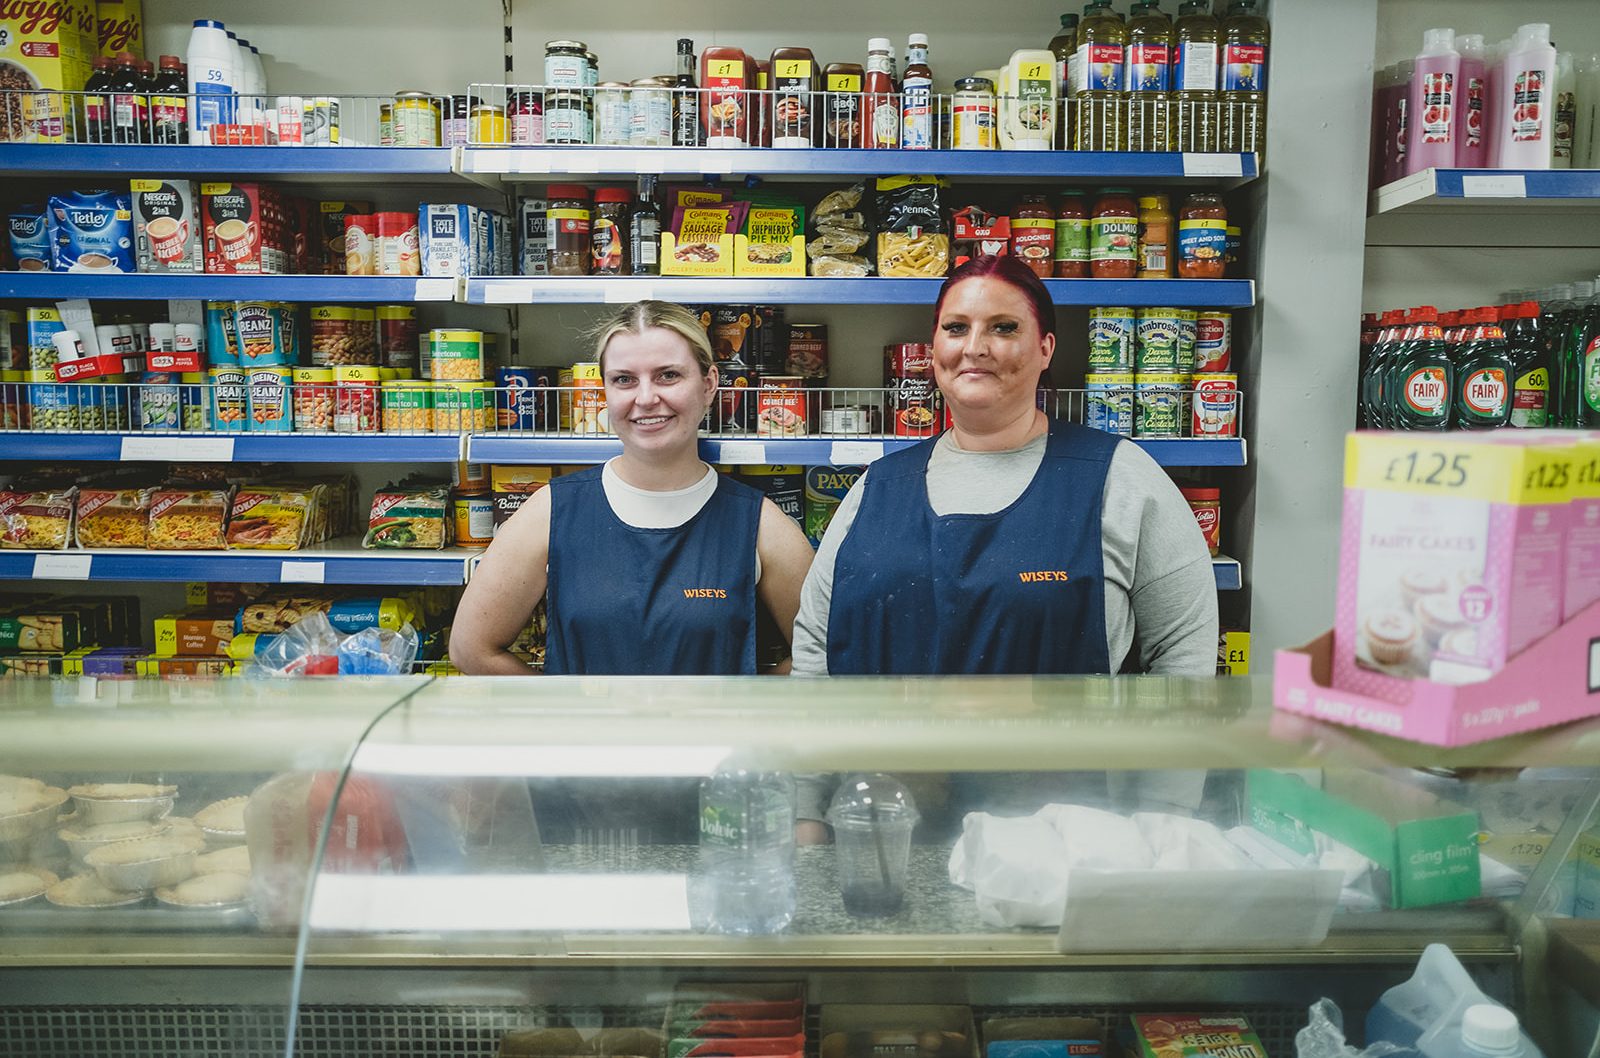 Two people stand behind a shop counter smiling. They each wear a tabard apron with the word 'Wiseys' and behind them are some shop shelves full of tins and packets of food.